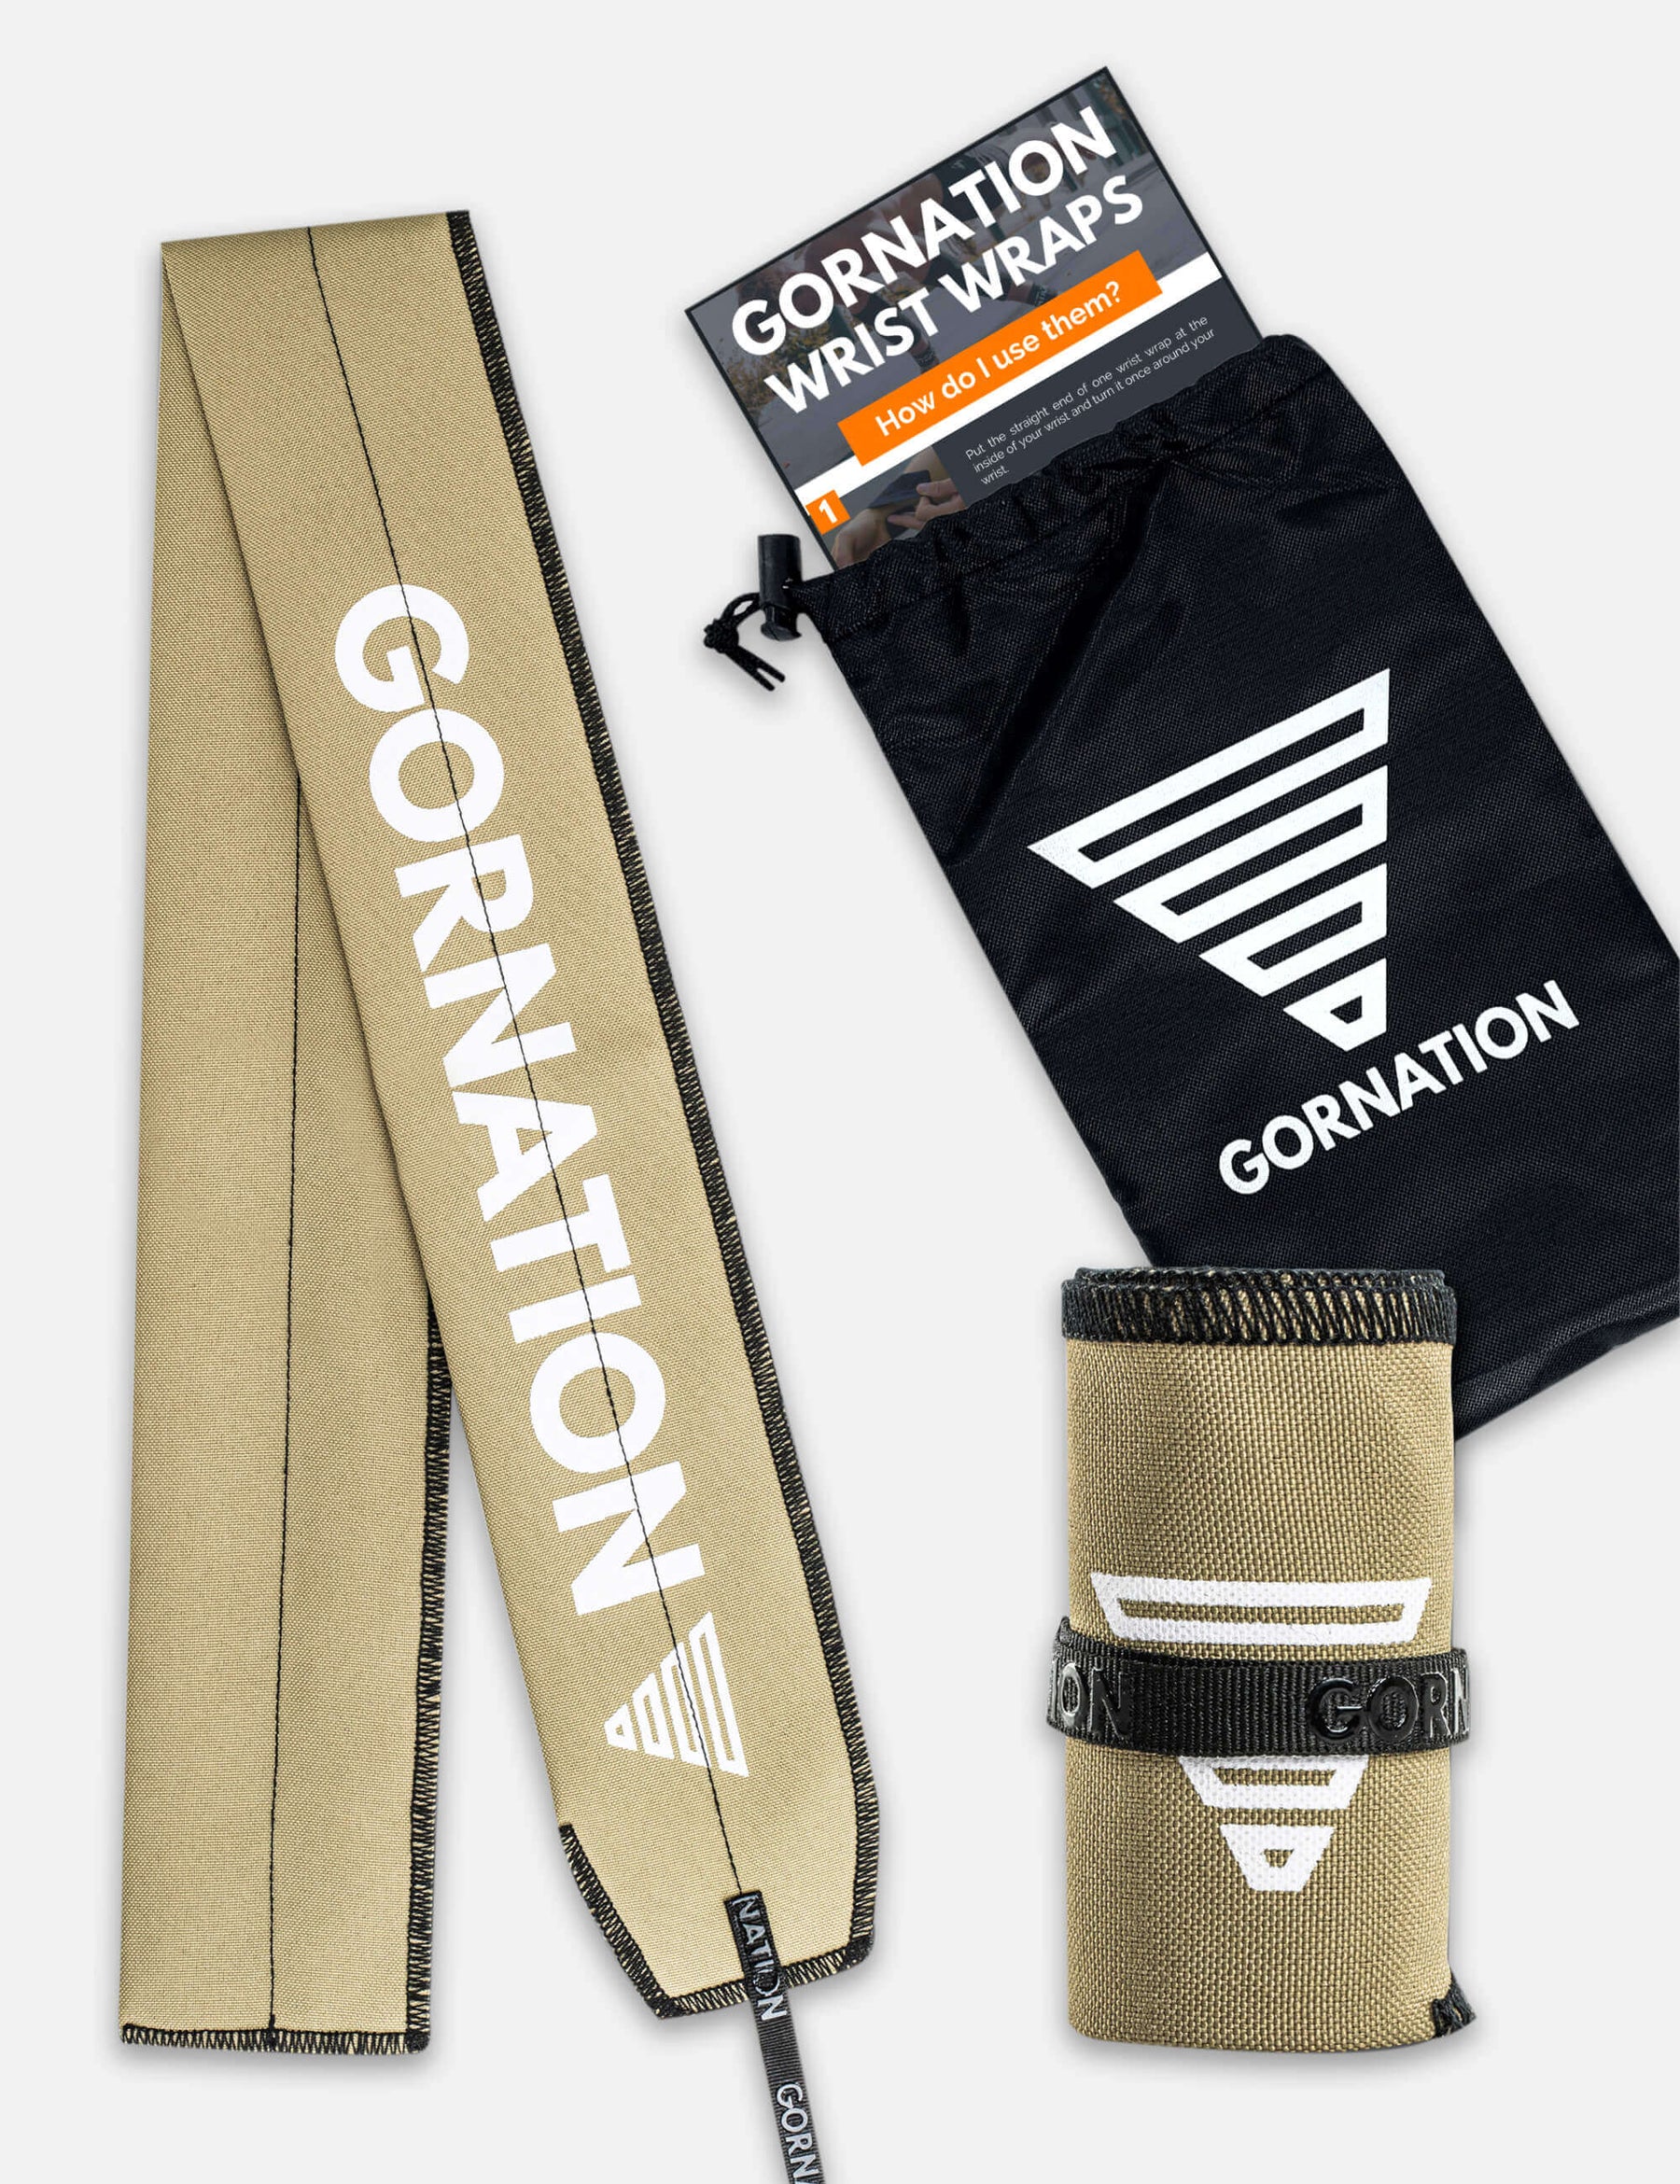 Olive wrist wrap from Gornation for extra stability and injury prevention. And black cary bag.